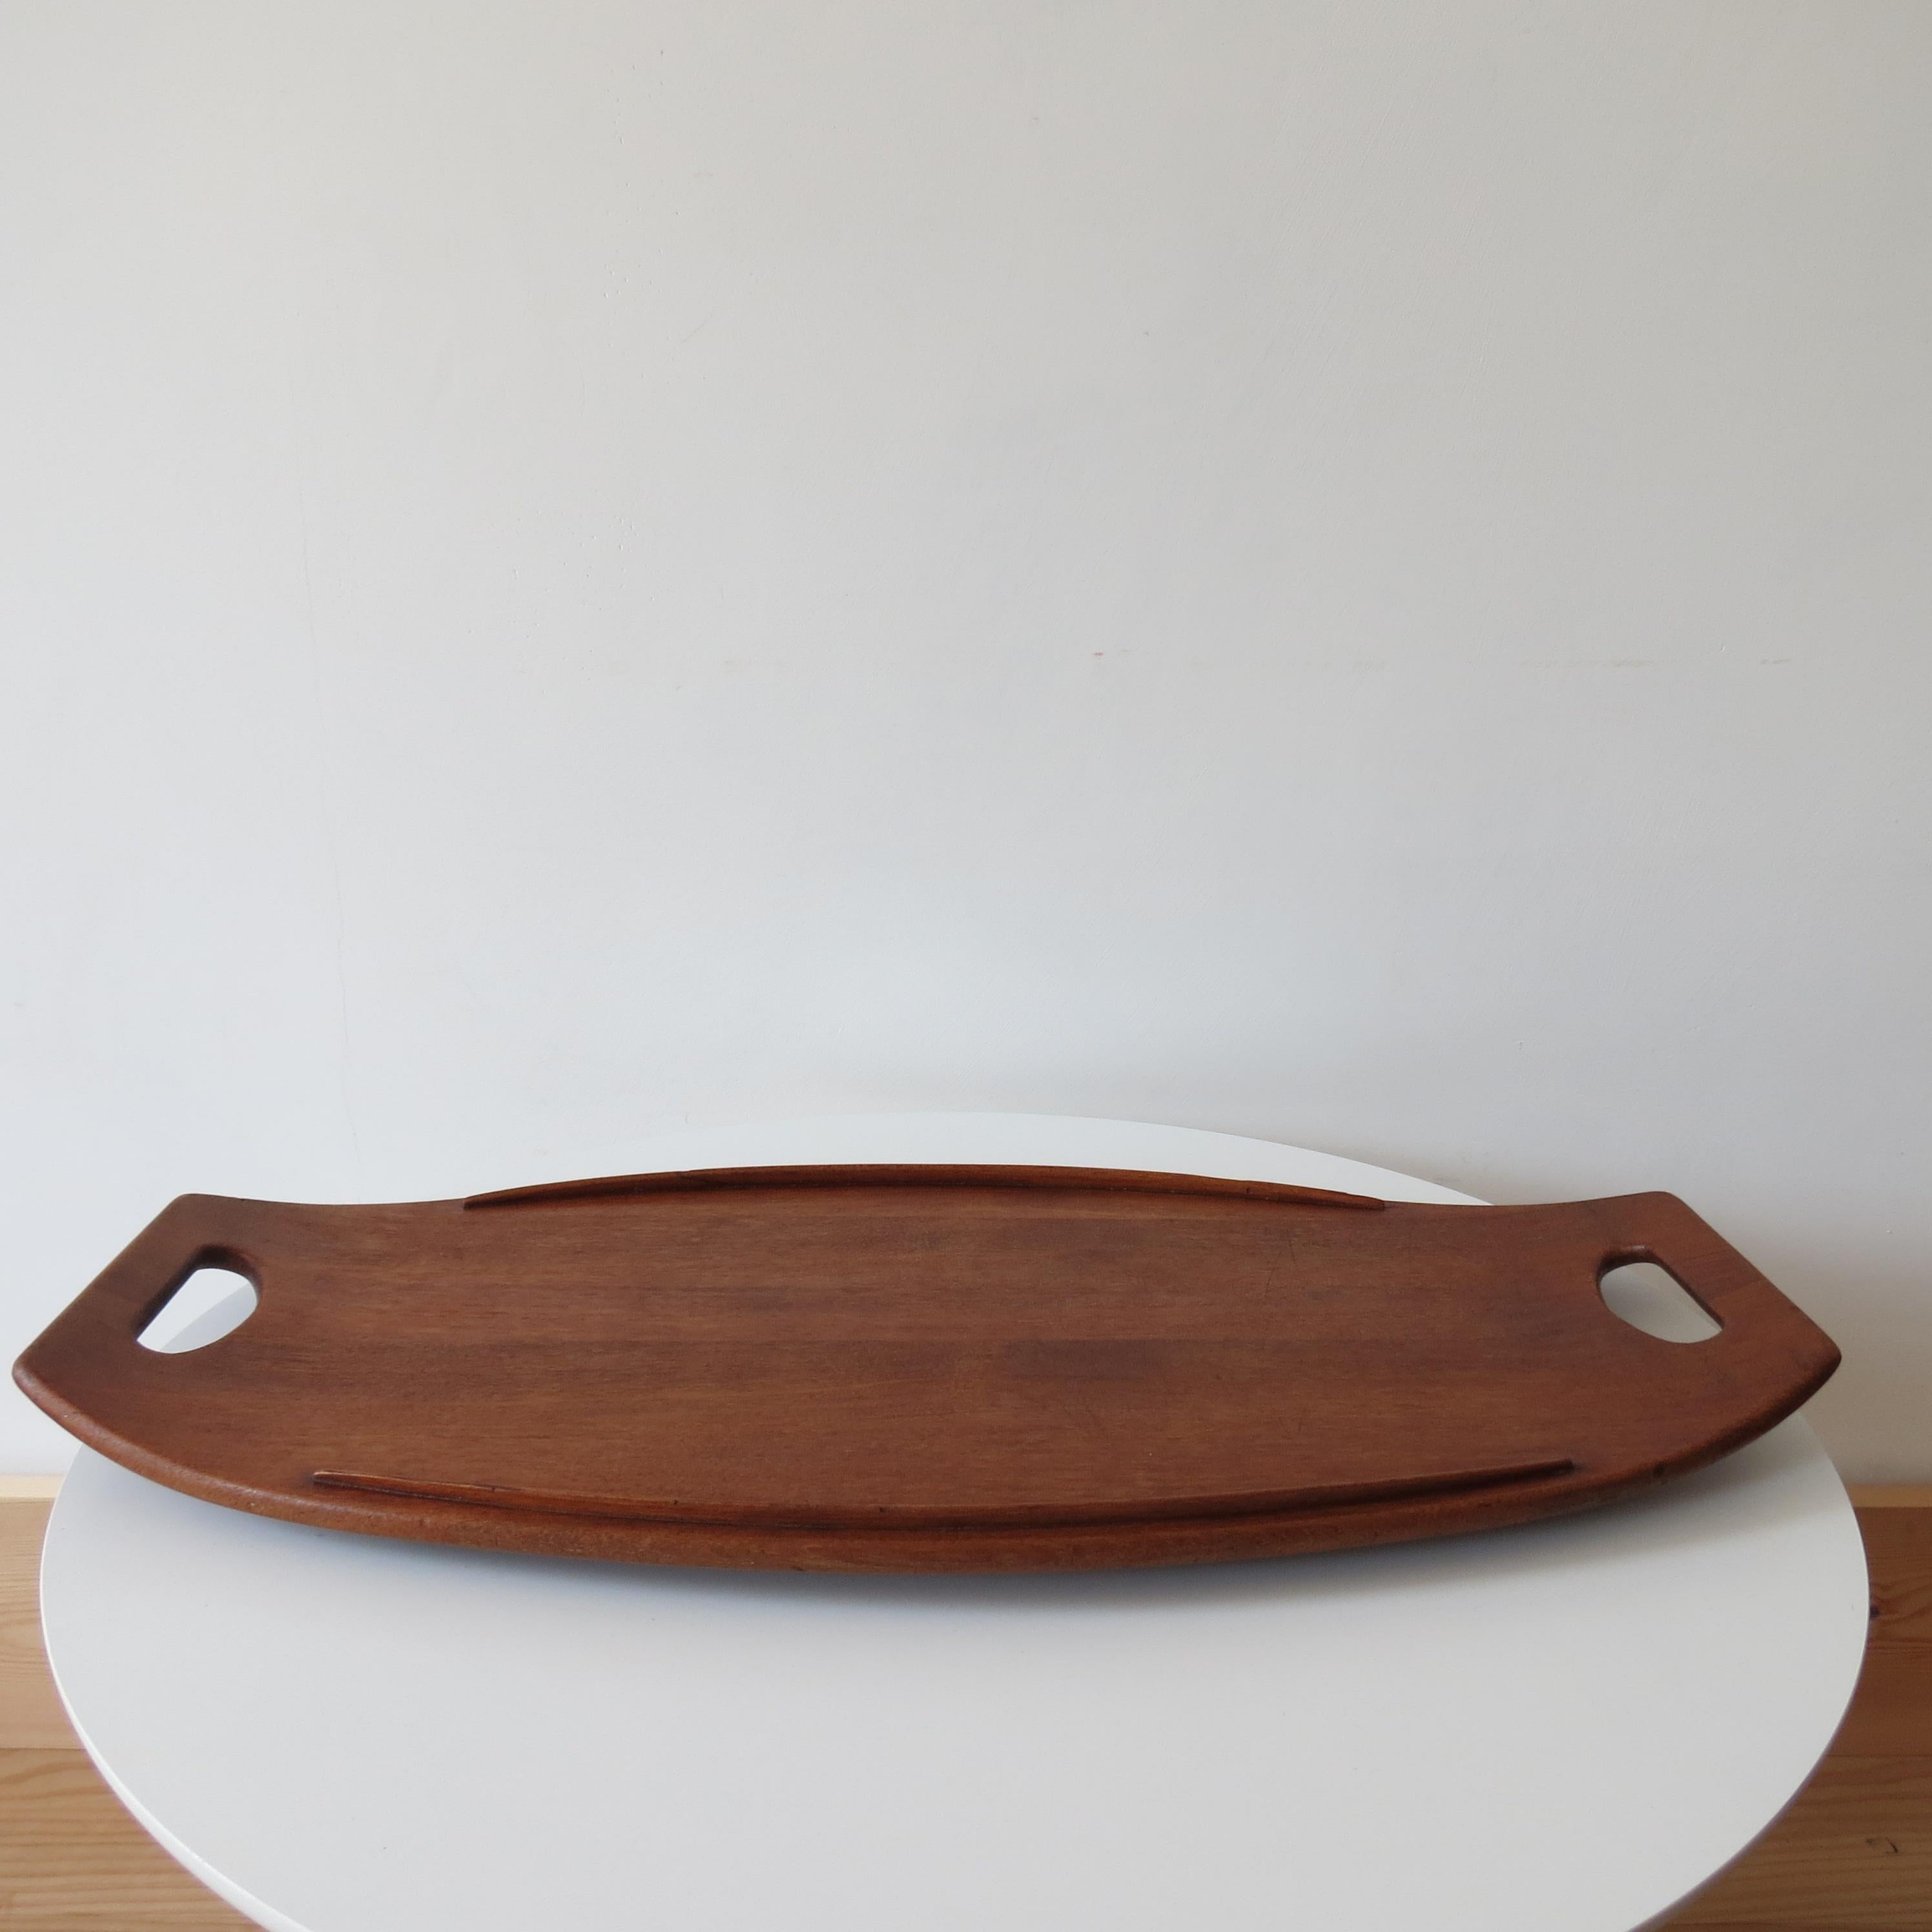 Teak tray designed by Jens Quistgaard for Dansk Design, 1950s.

Solid teak, in good vintage condition, some wear and marks to the top. Stamped Dansk Design, Denmark.

Small burn mark to the underside as shown in the photo.

Measures: 60cm x